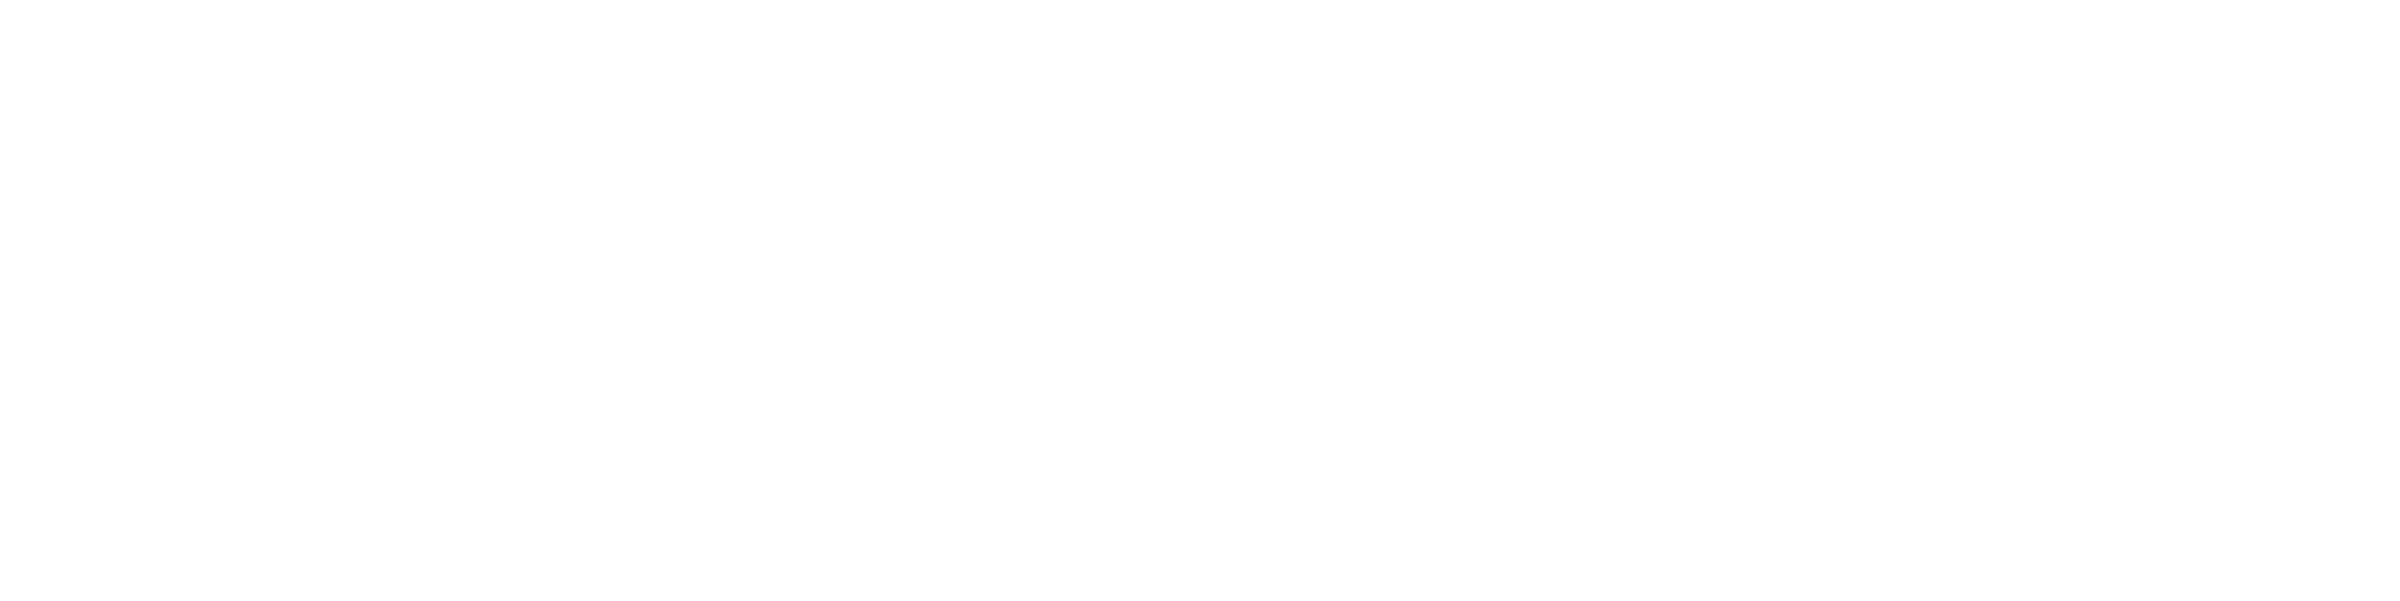 https://www.foundationswithjanet.org